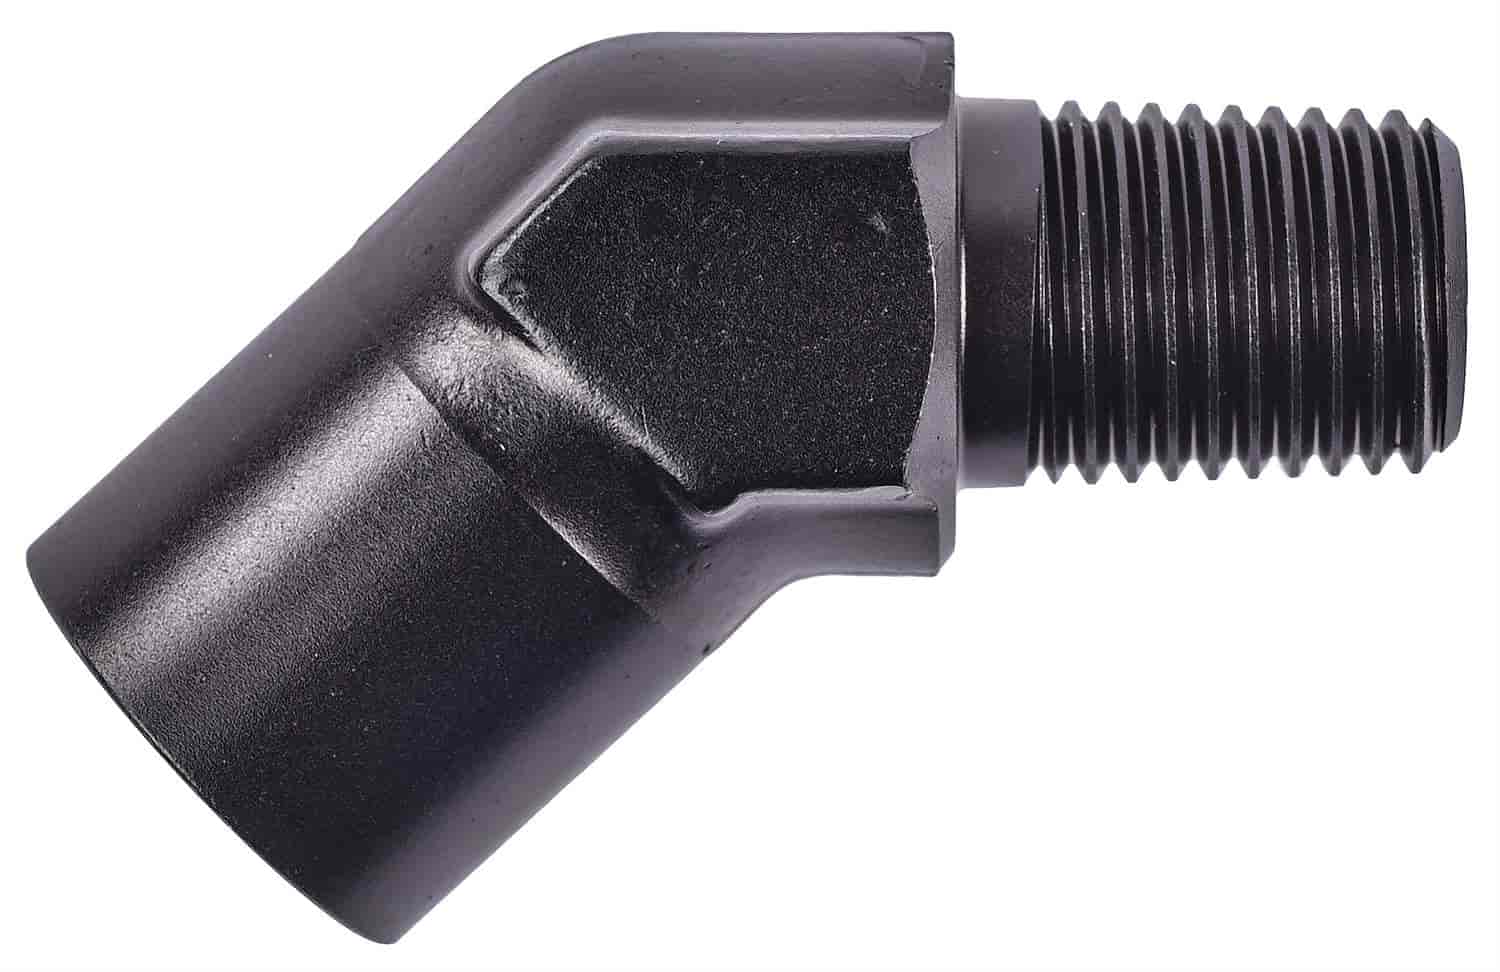 NPT to NPT 45-Degree Union Fitting [1/4 in. NPT Male to 1/4 in. NPT Female, Black]